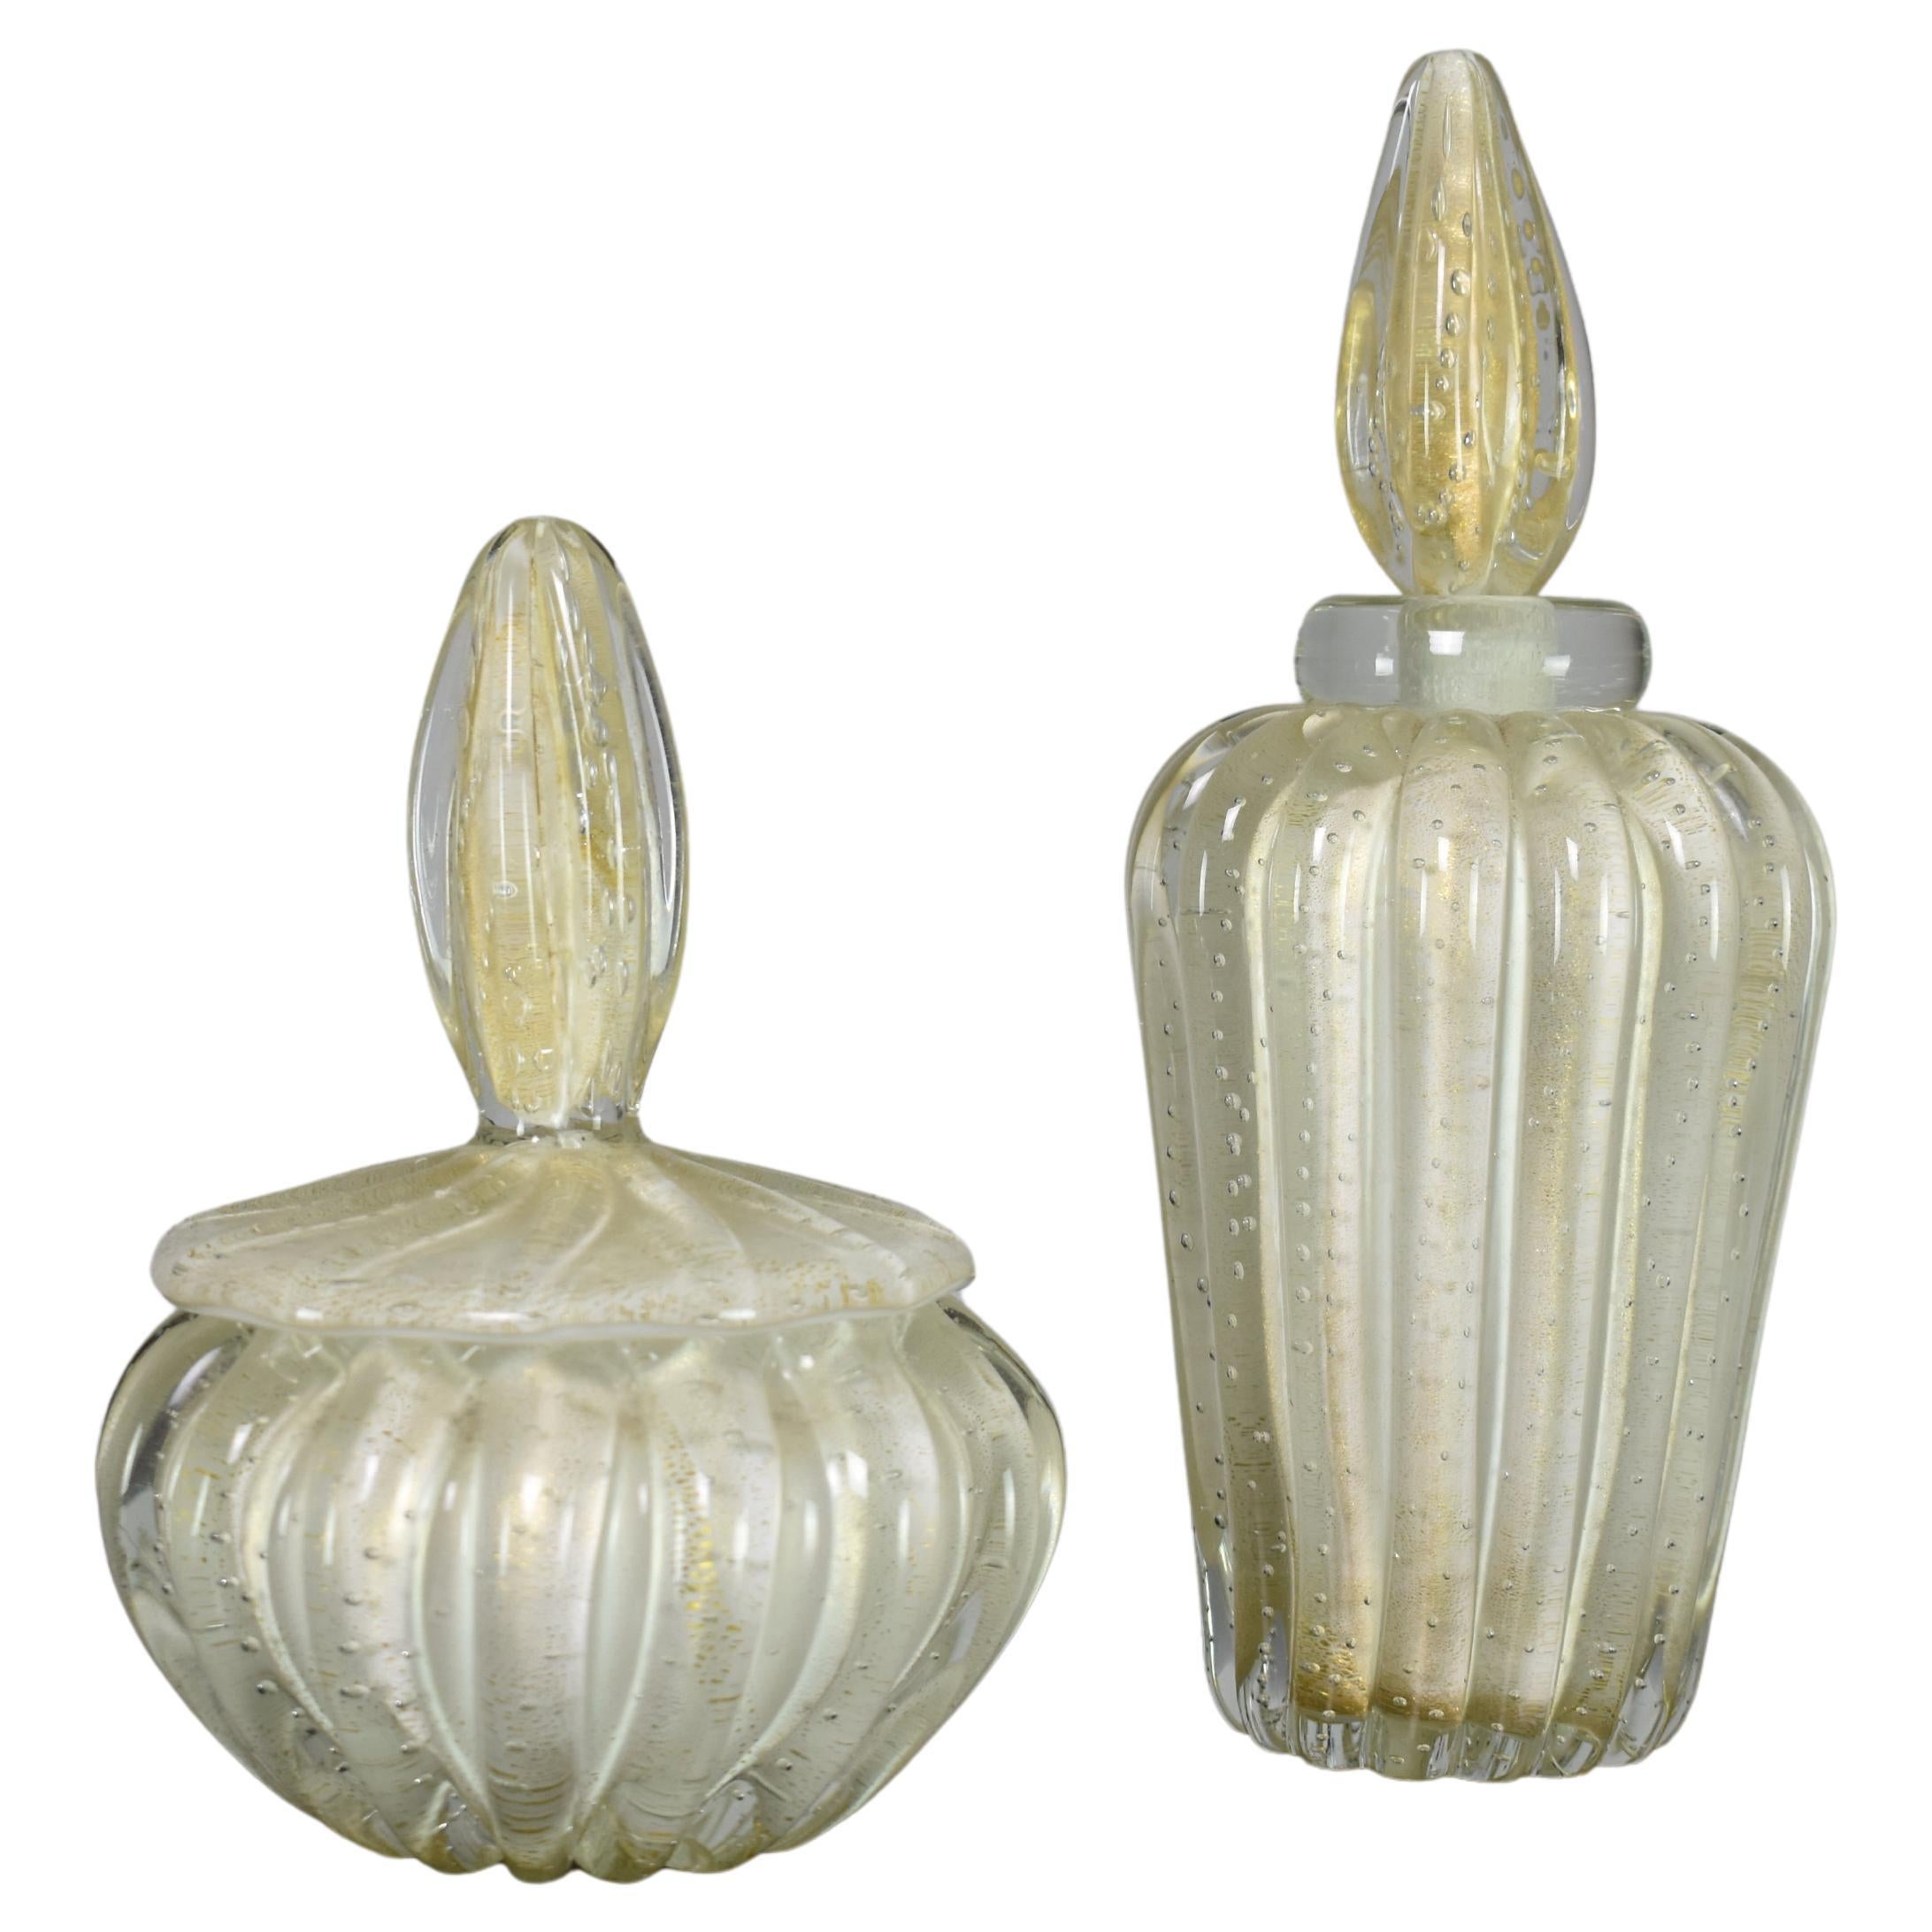 Set of Italian Glass Art Perfume and Powder Bottles by Alfredo Barbini, 1950s For Sale